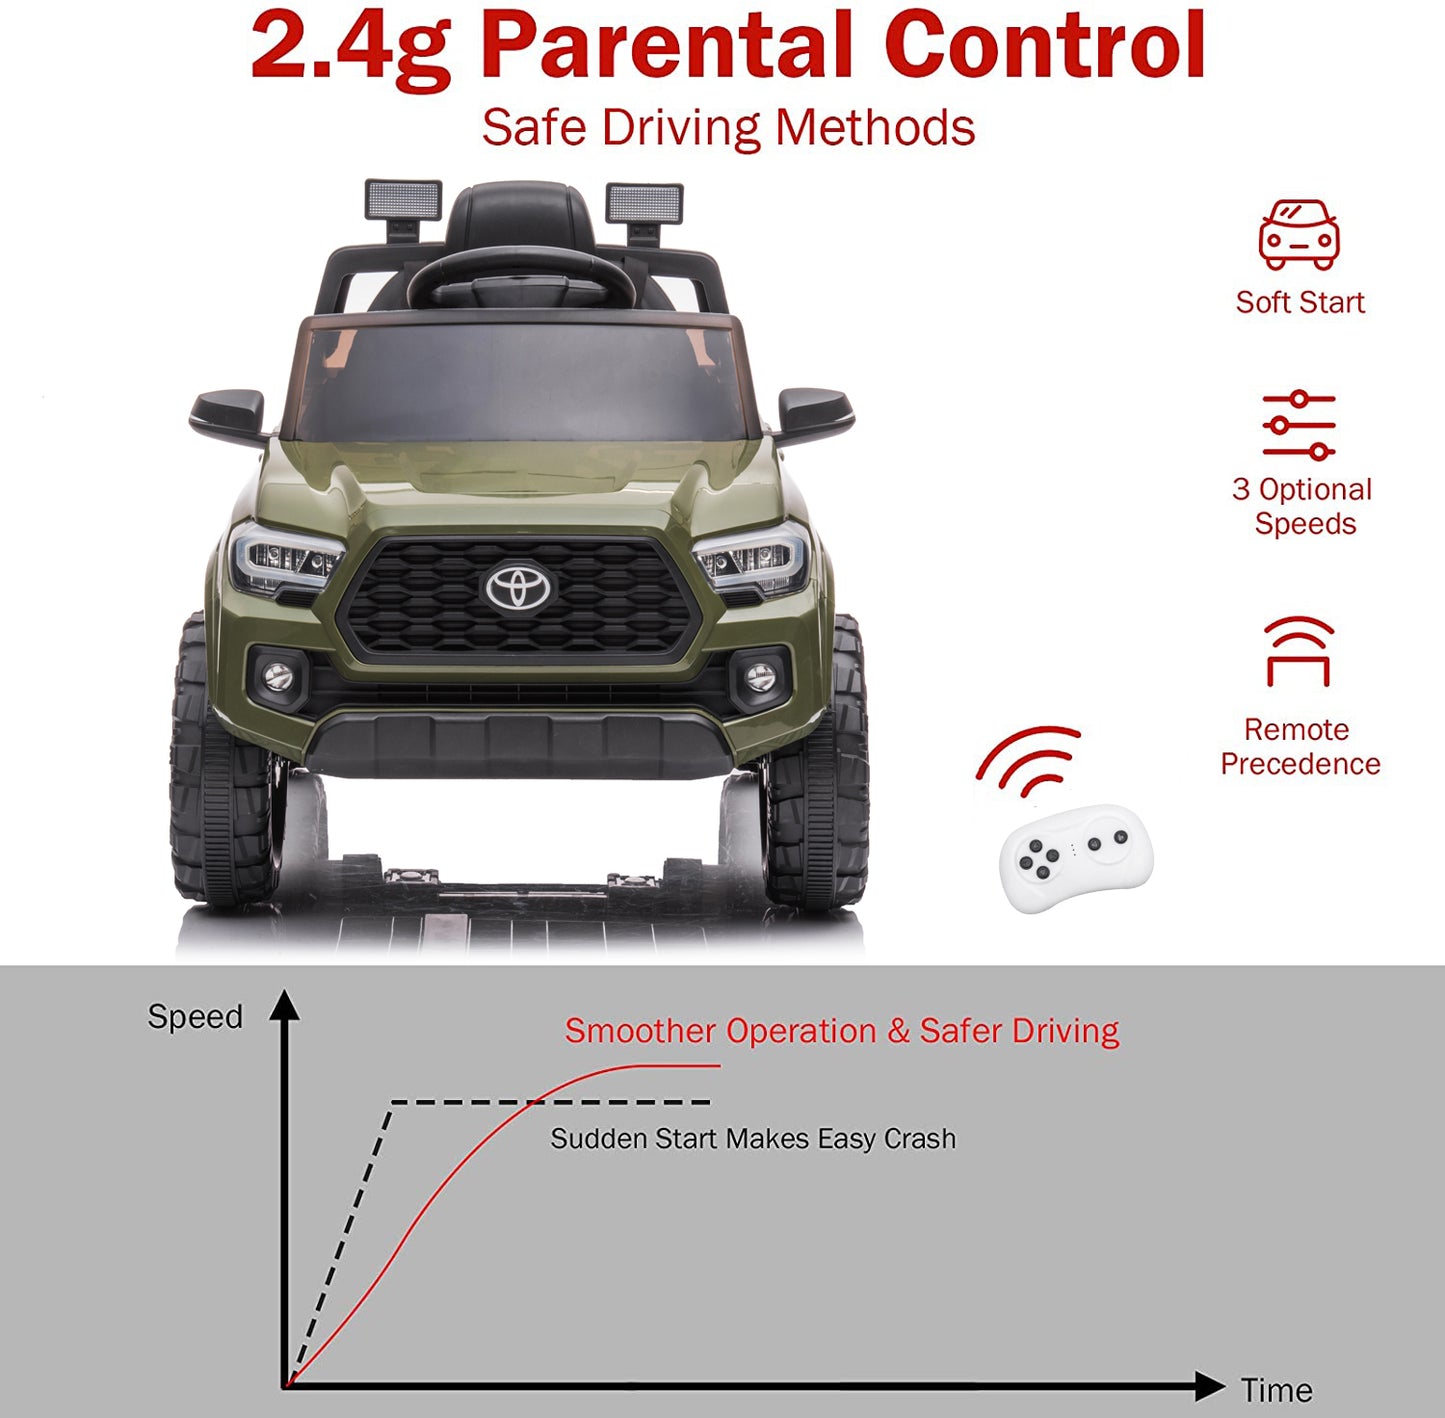 SYNGAR Kids 12V Licensed Toyota Tacoma Powered Ride on Car, Electric Ride on Toy with Remote Control, MP3 Player and LED Lights, Battery Powered Car Vehicle for Kids Boys Girls Gift, Green, Y018